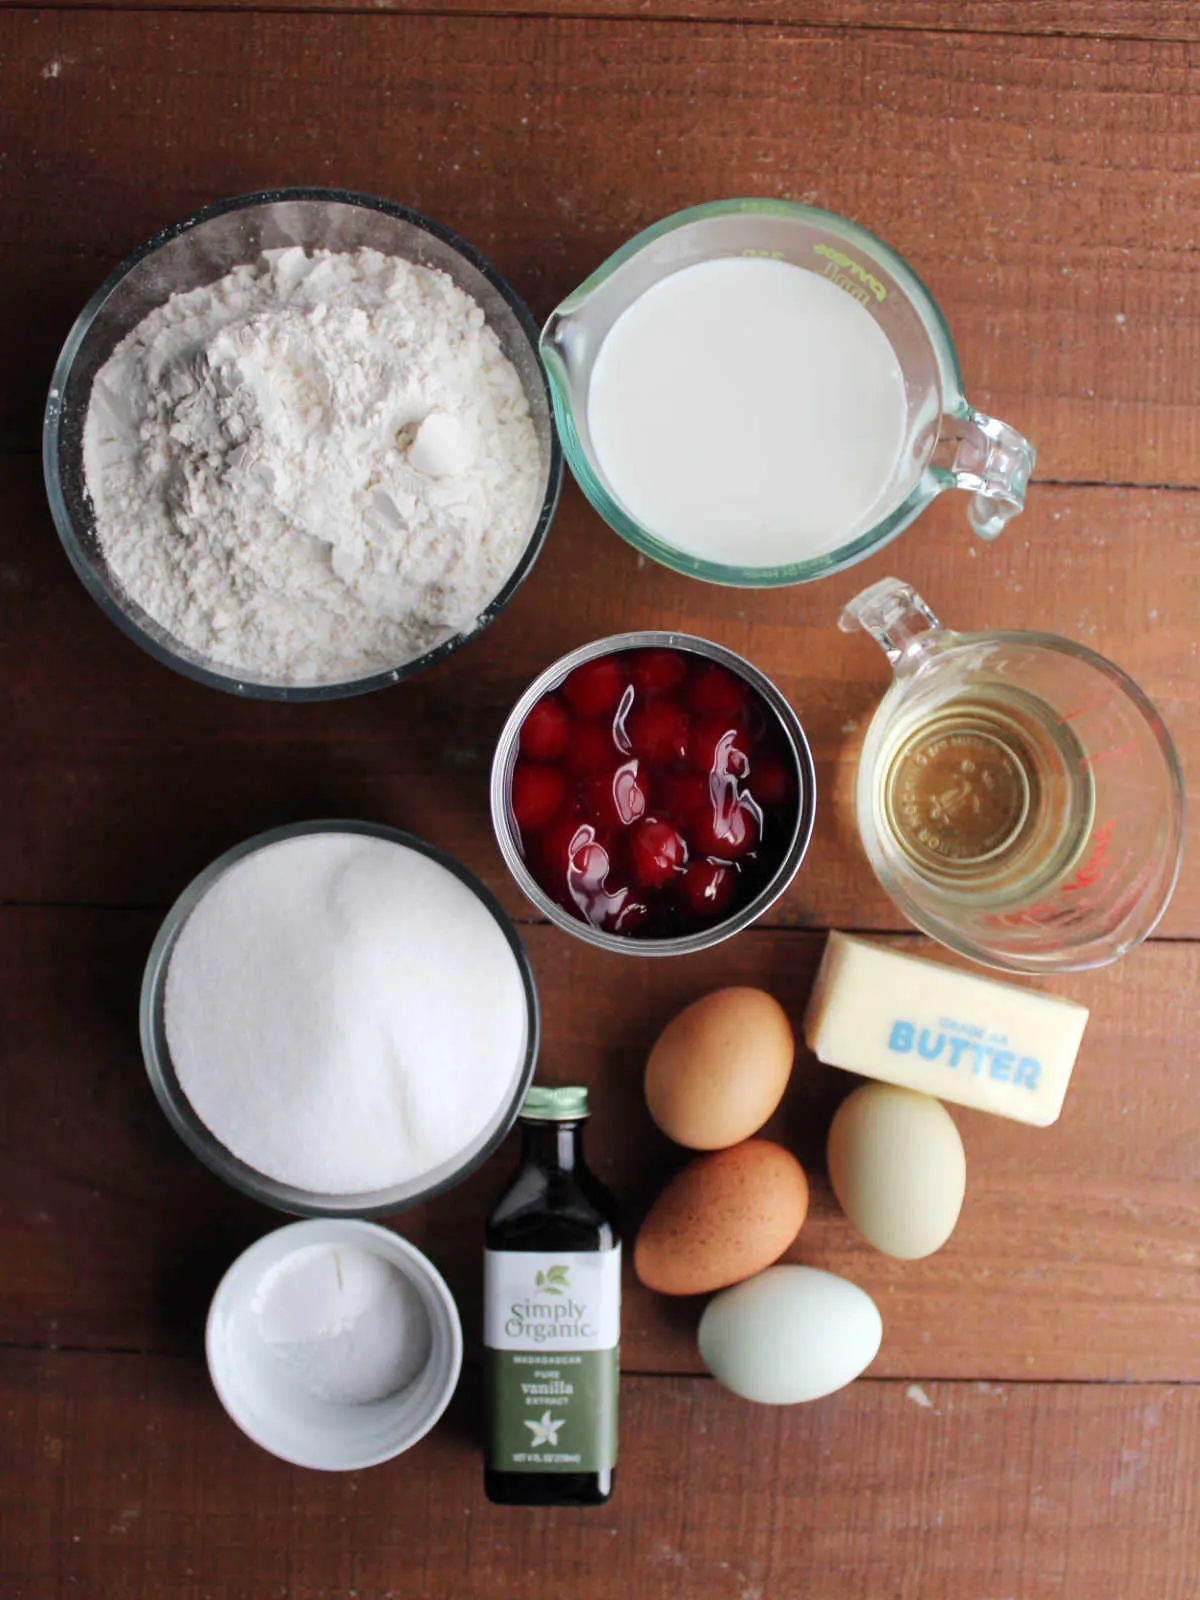 Ingredients including flour, sugar, milk, butter, eggs, oil, vanilla, baking powder, salt and cherry pie filling ready to made into cupcakes.